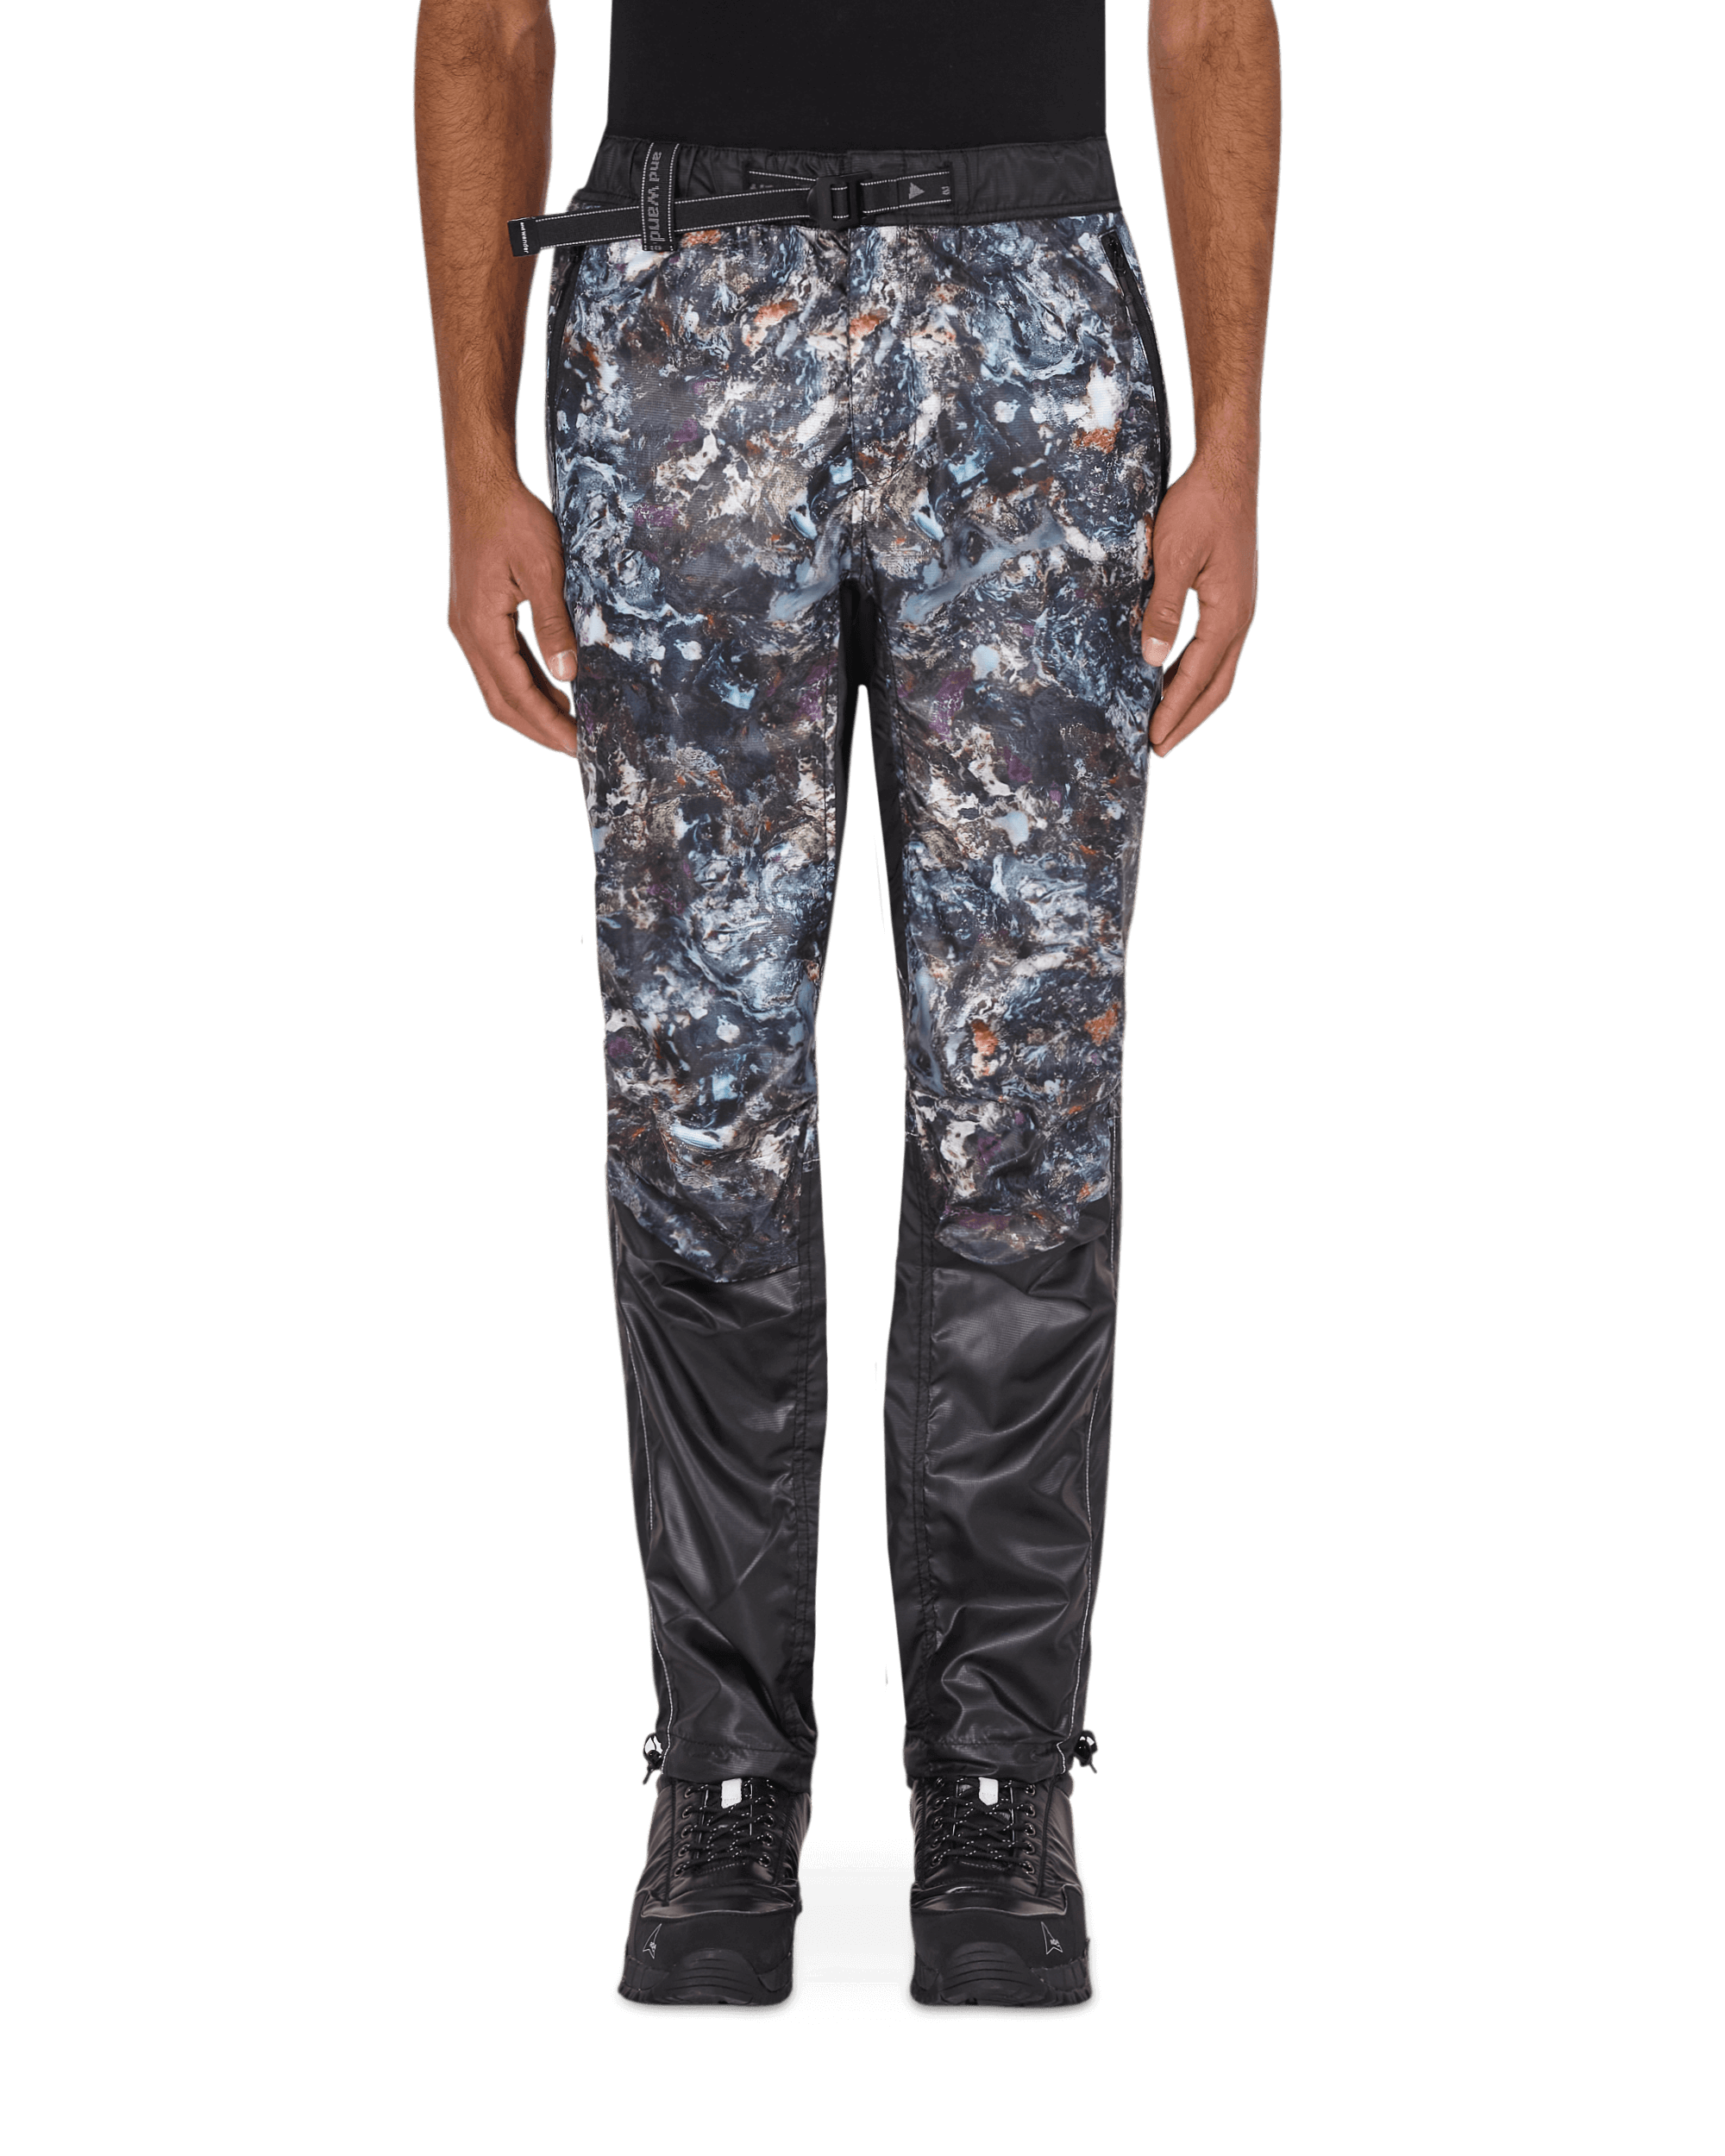 And Wander Stone Printed Rip Black Pants Trousers 5740222009 010